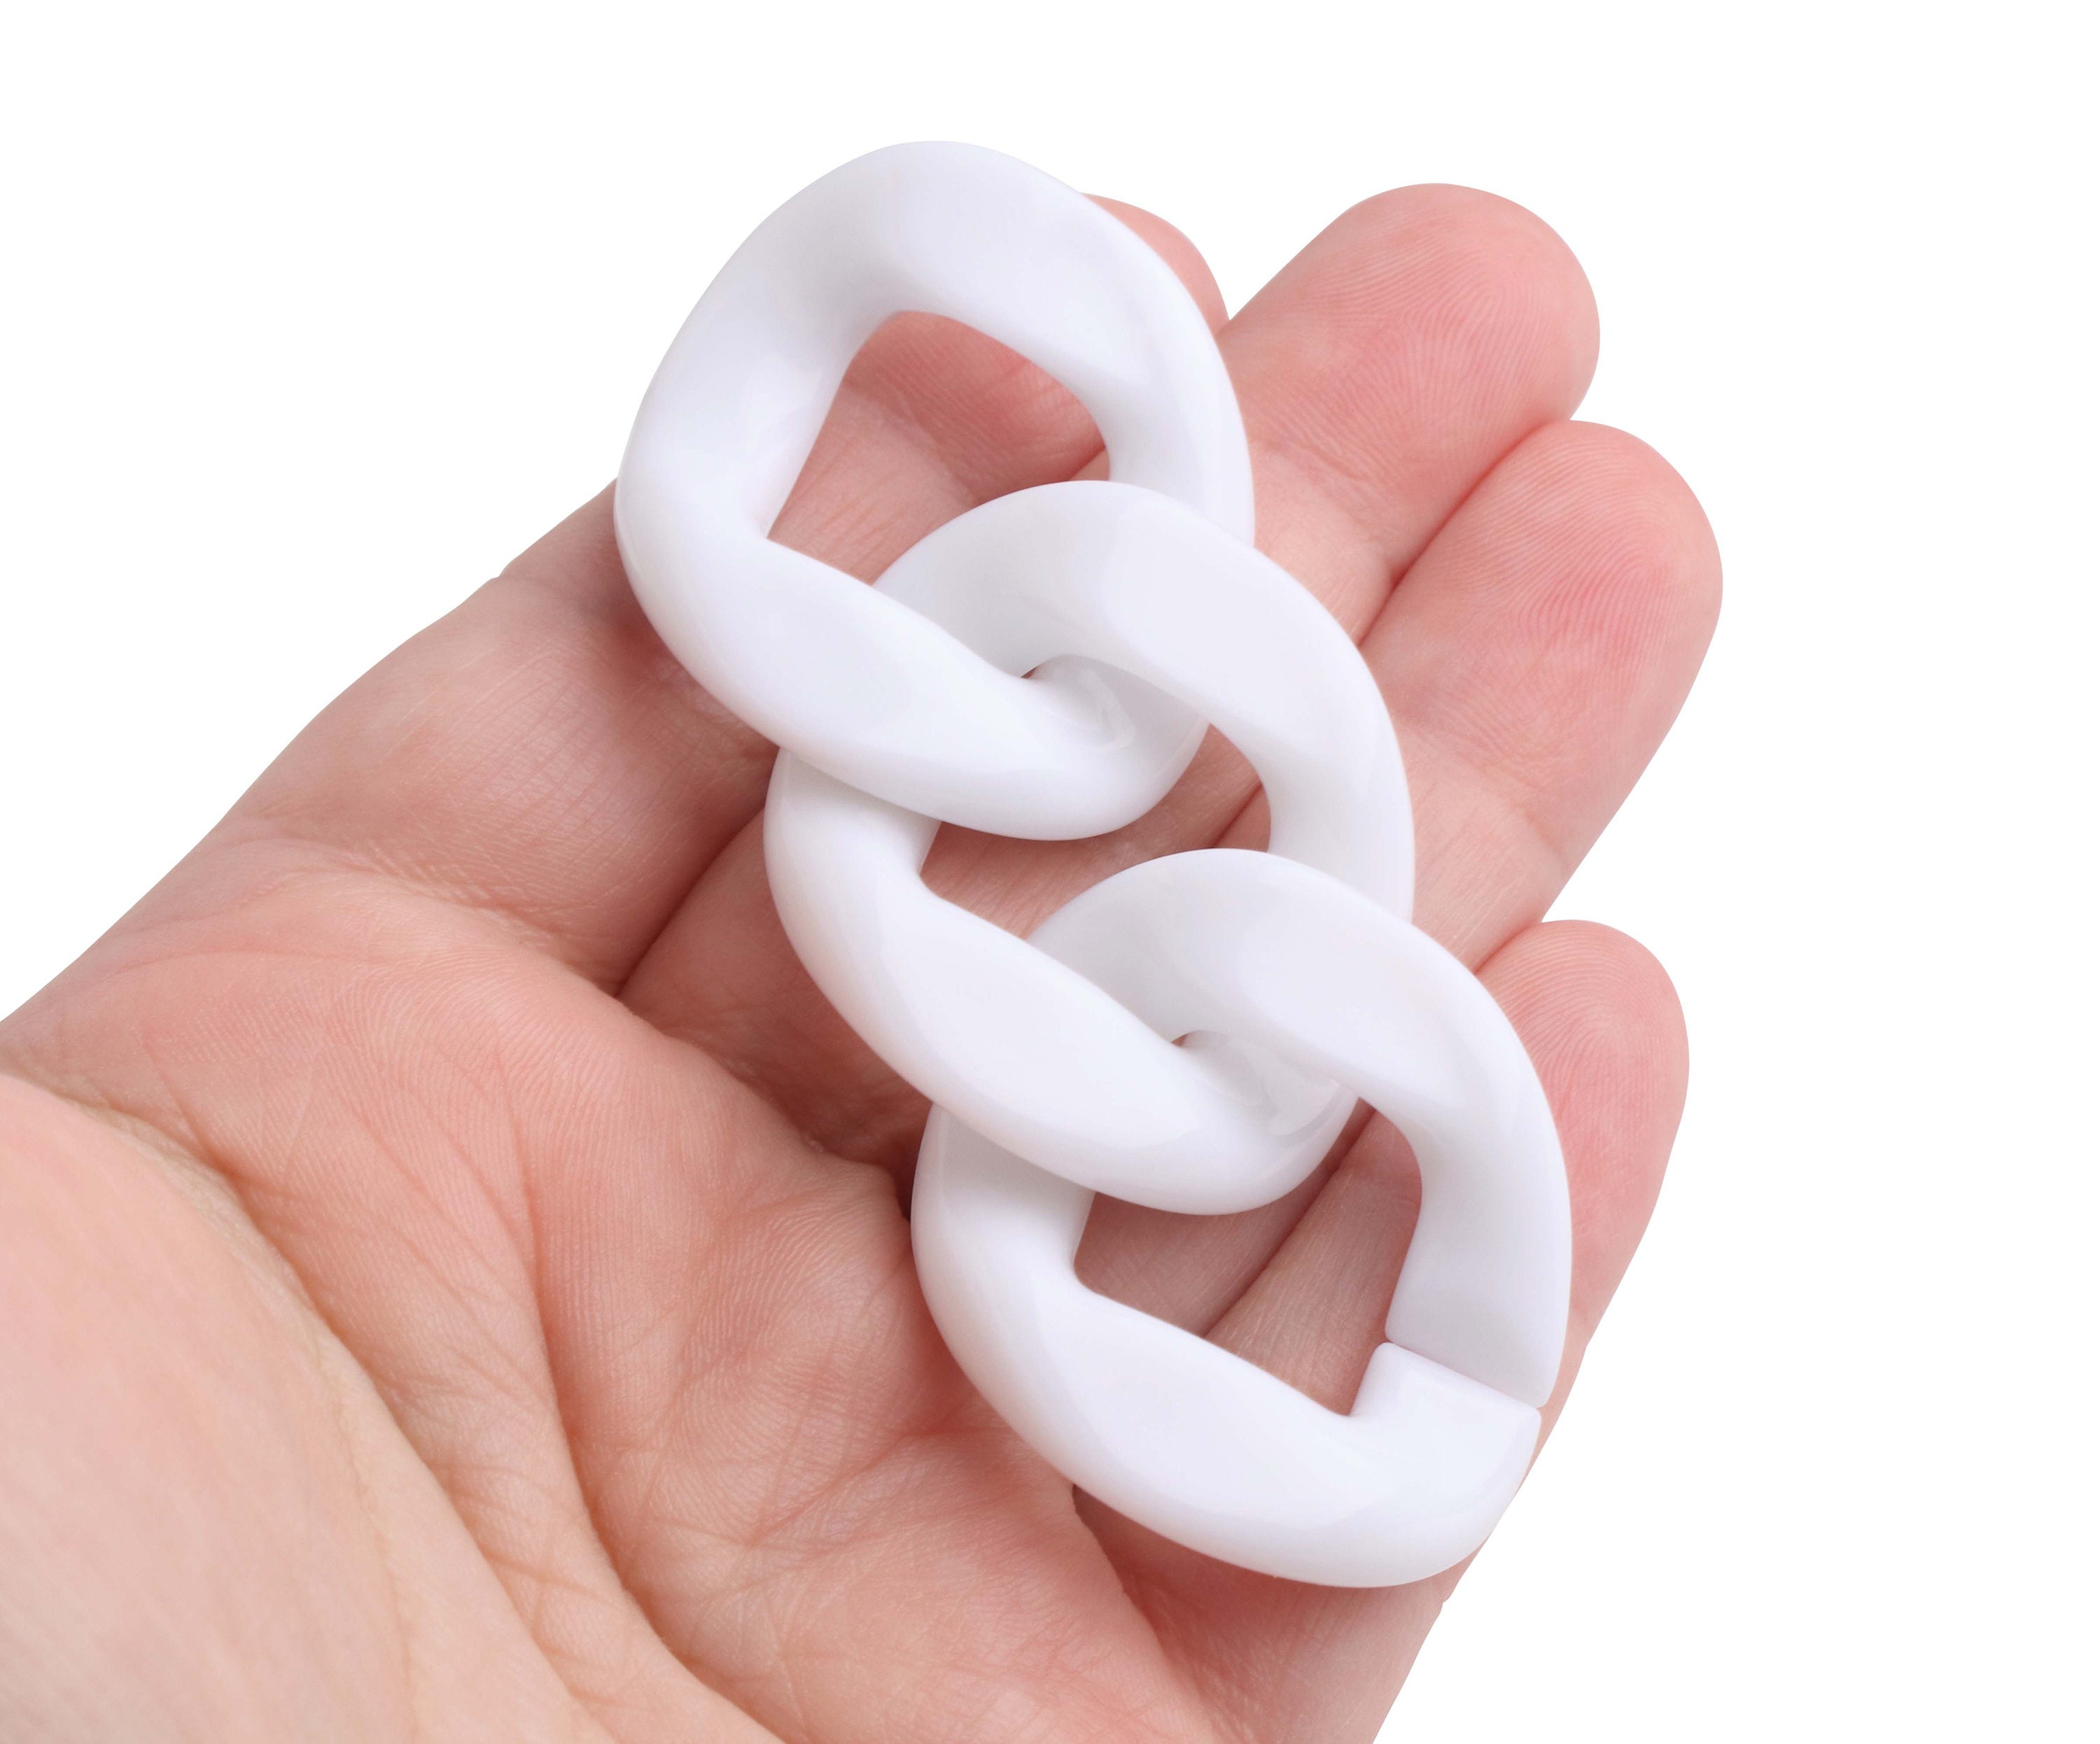 1ft Pure White Acrylic Chain Links, 31mm, Bulky, Decorative Chain